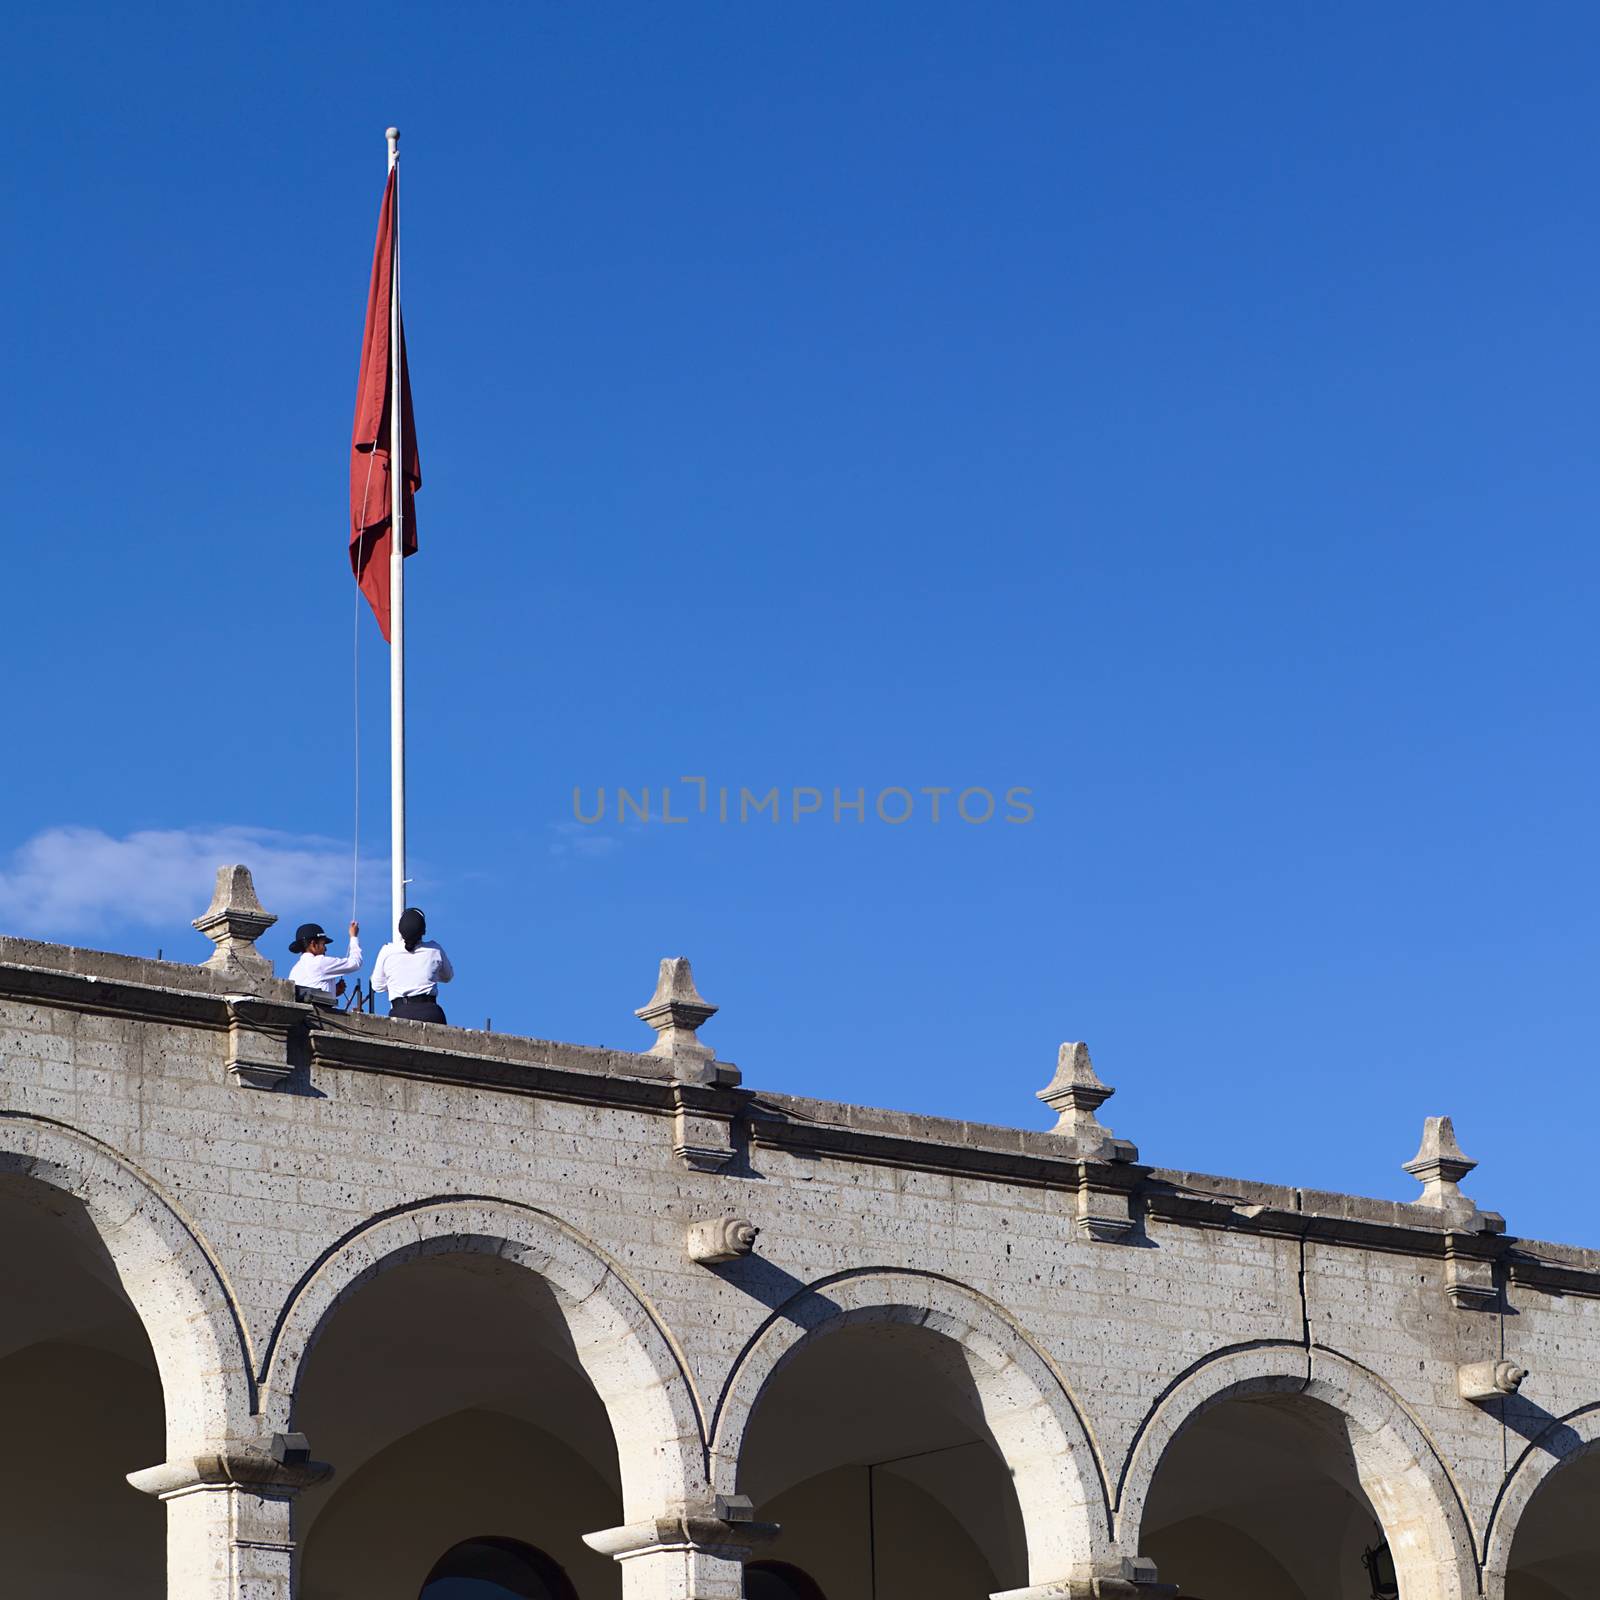 AREQUIPA, PERU - OCTOBER 8, 2014: Unidentified women pulling up the flag of Arequipa onto a flagpole on top of the city hall along Portal de la Municipalidad at the Plaza de Armas (main square) in the morning on October 8, 2014 in Arequipa, Peru